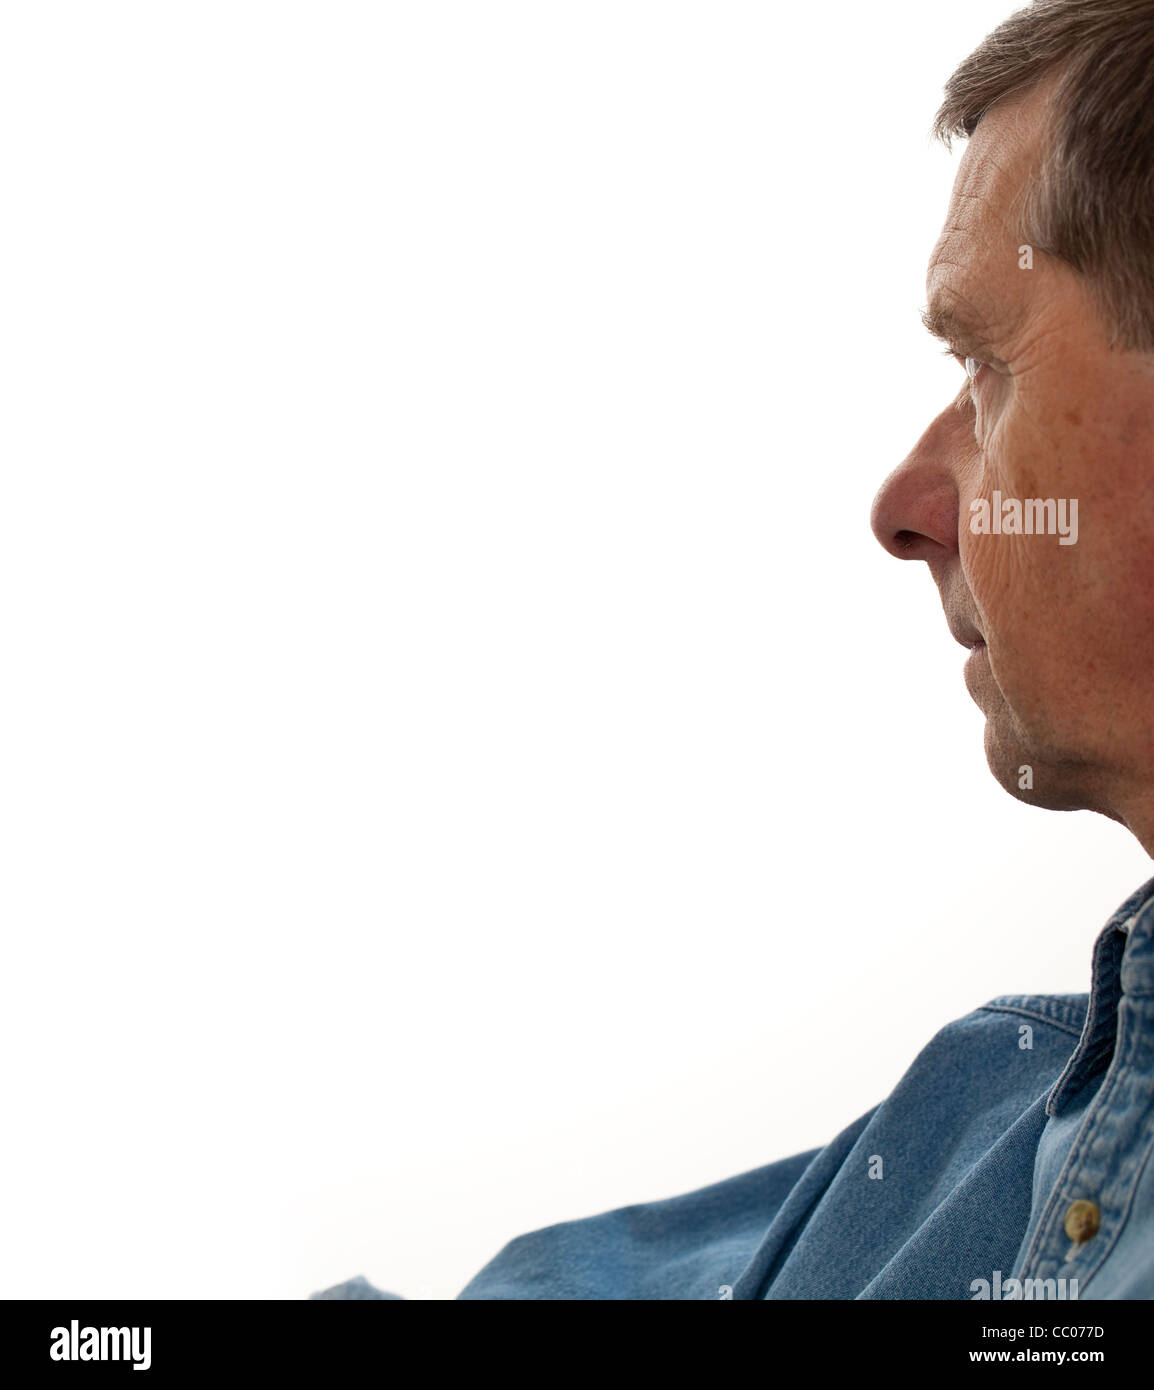 Profile of a middle aged man reaching for something to the left of the page and staring into the distance Stock Photo